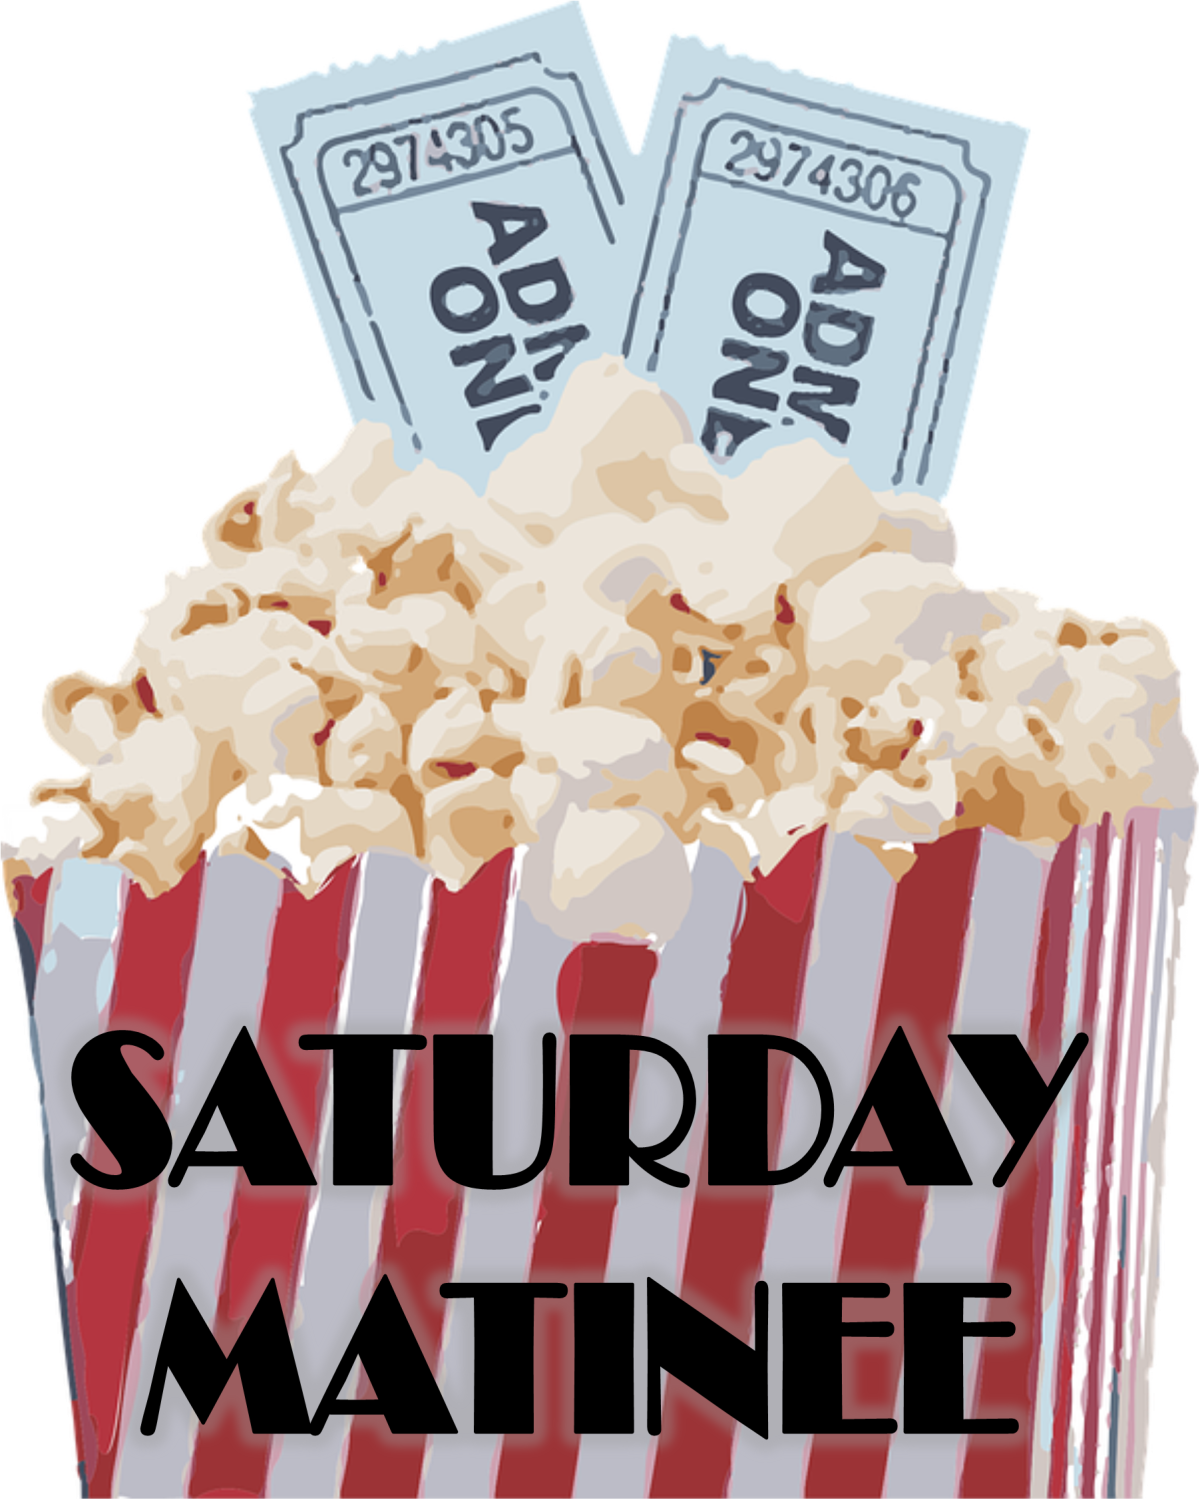 Top of a popcorn box with two tickets sticking up out of the popcorn and the words Saturday Matinee on the box.